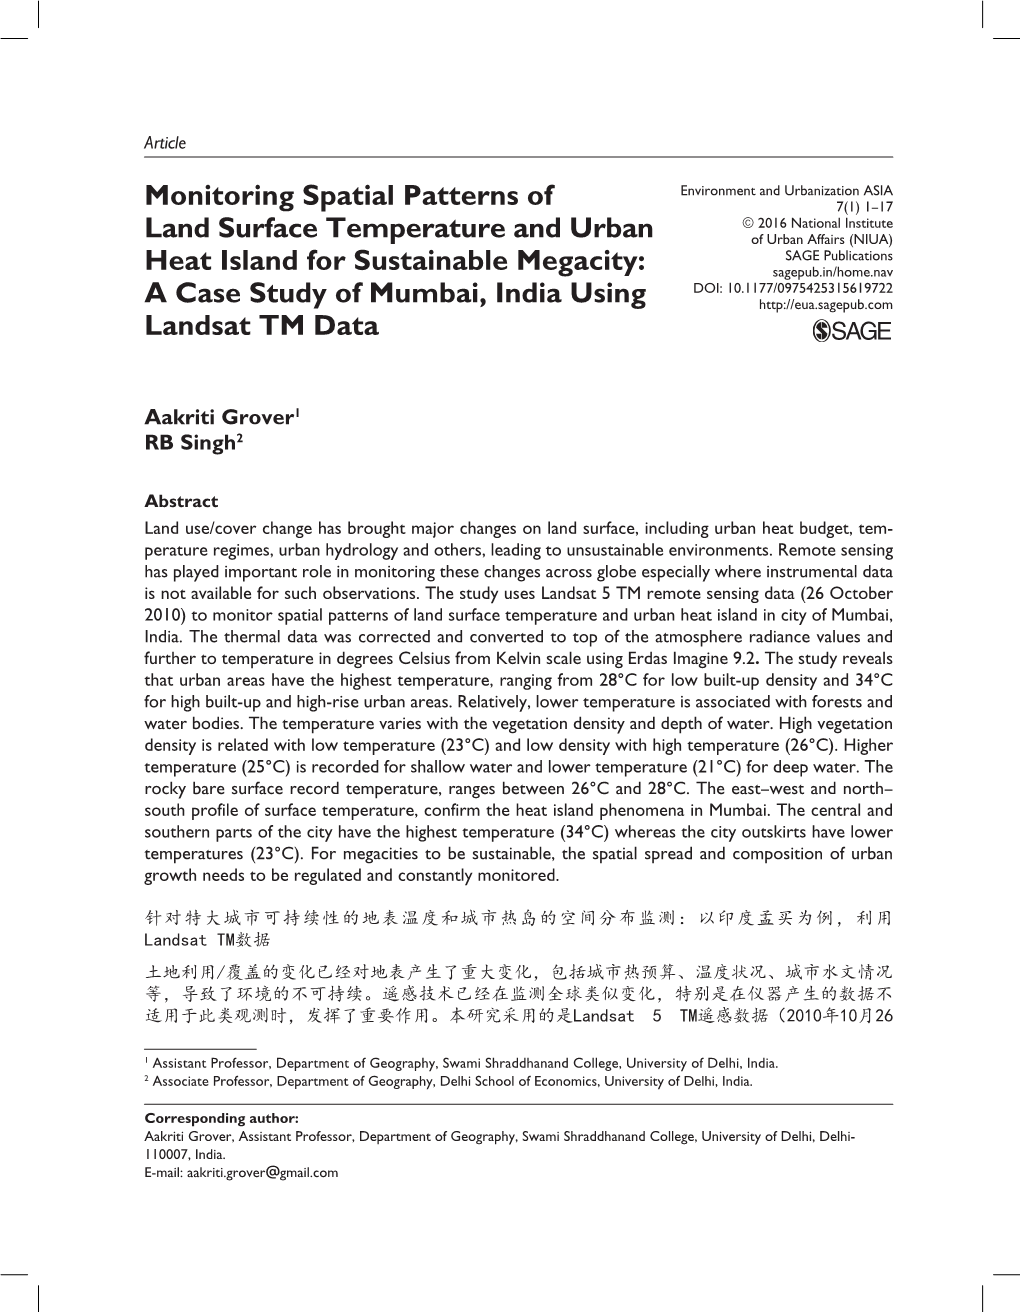 Monitoring Spatial Patterns of Land Surface Temperature and Urban Heat Island for Sustainable Megacity: a Case Study of Mumbai